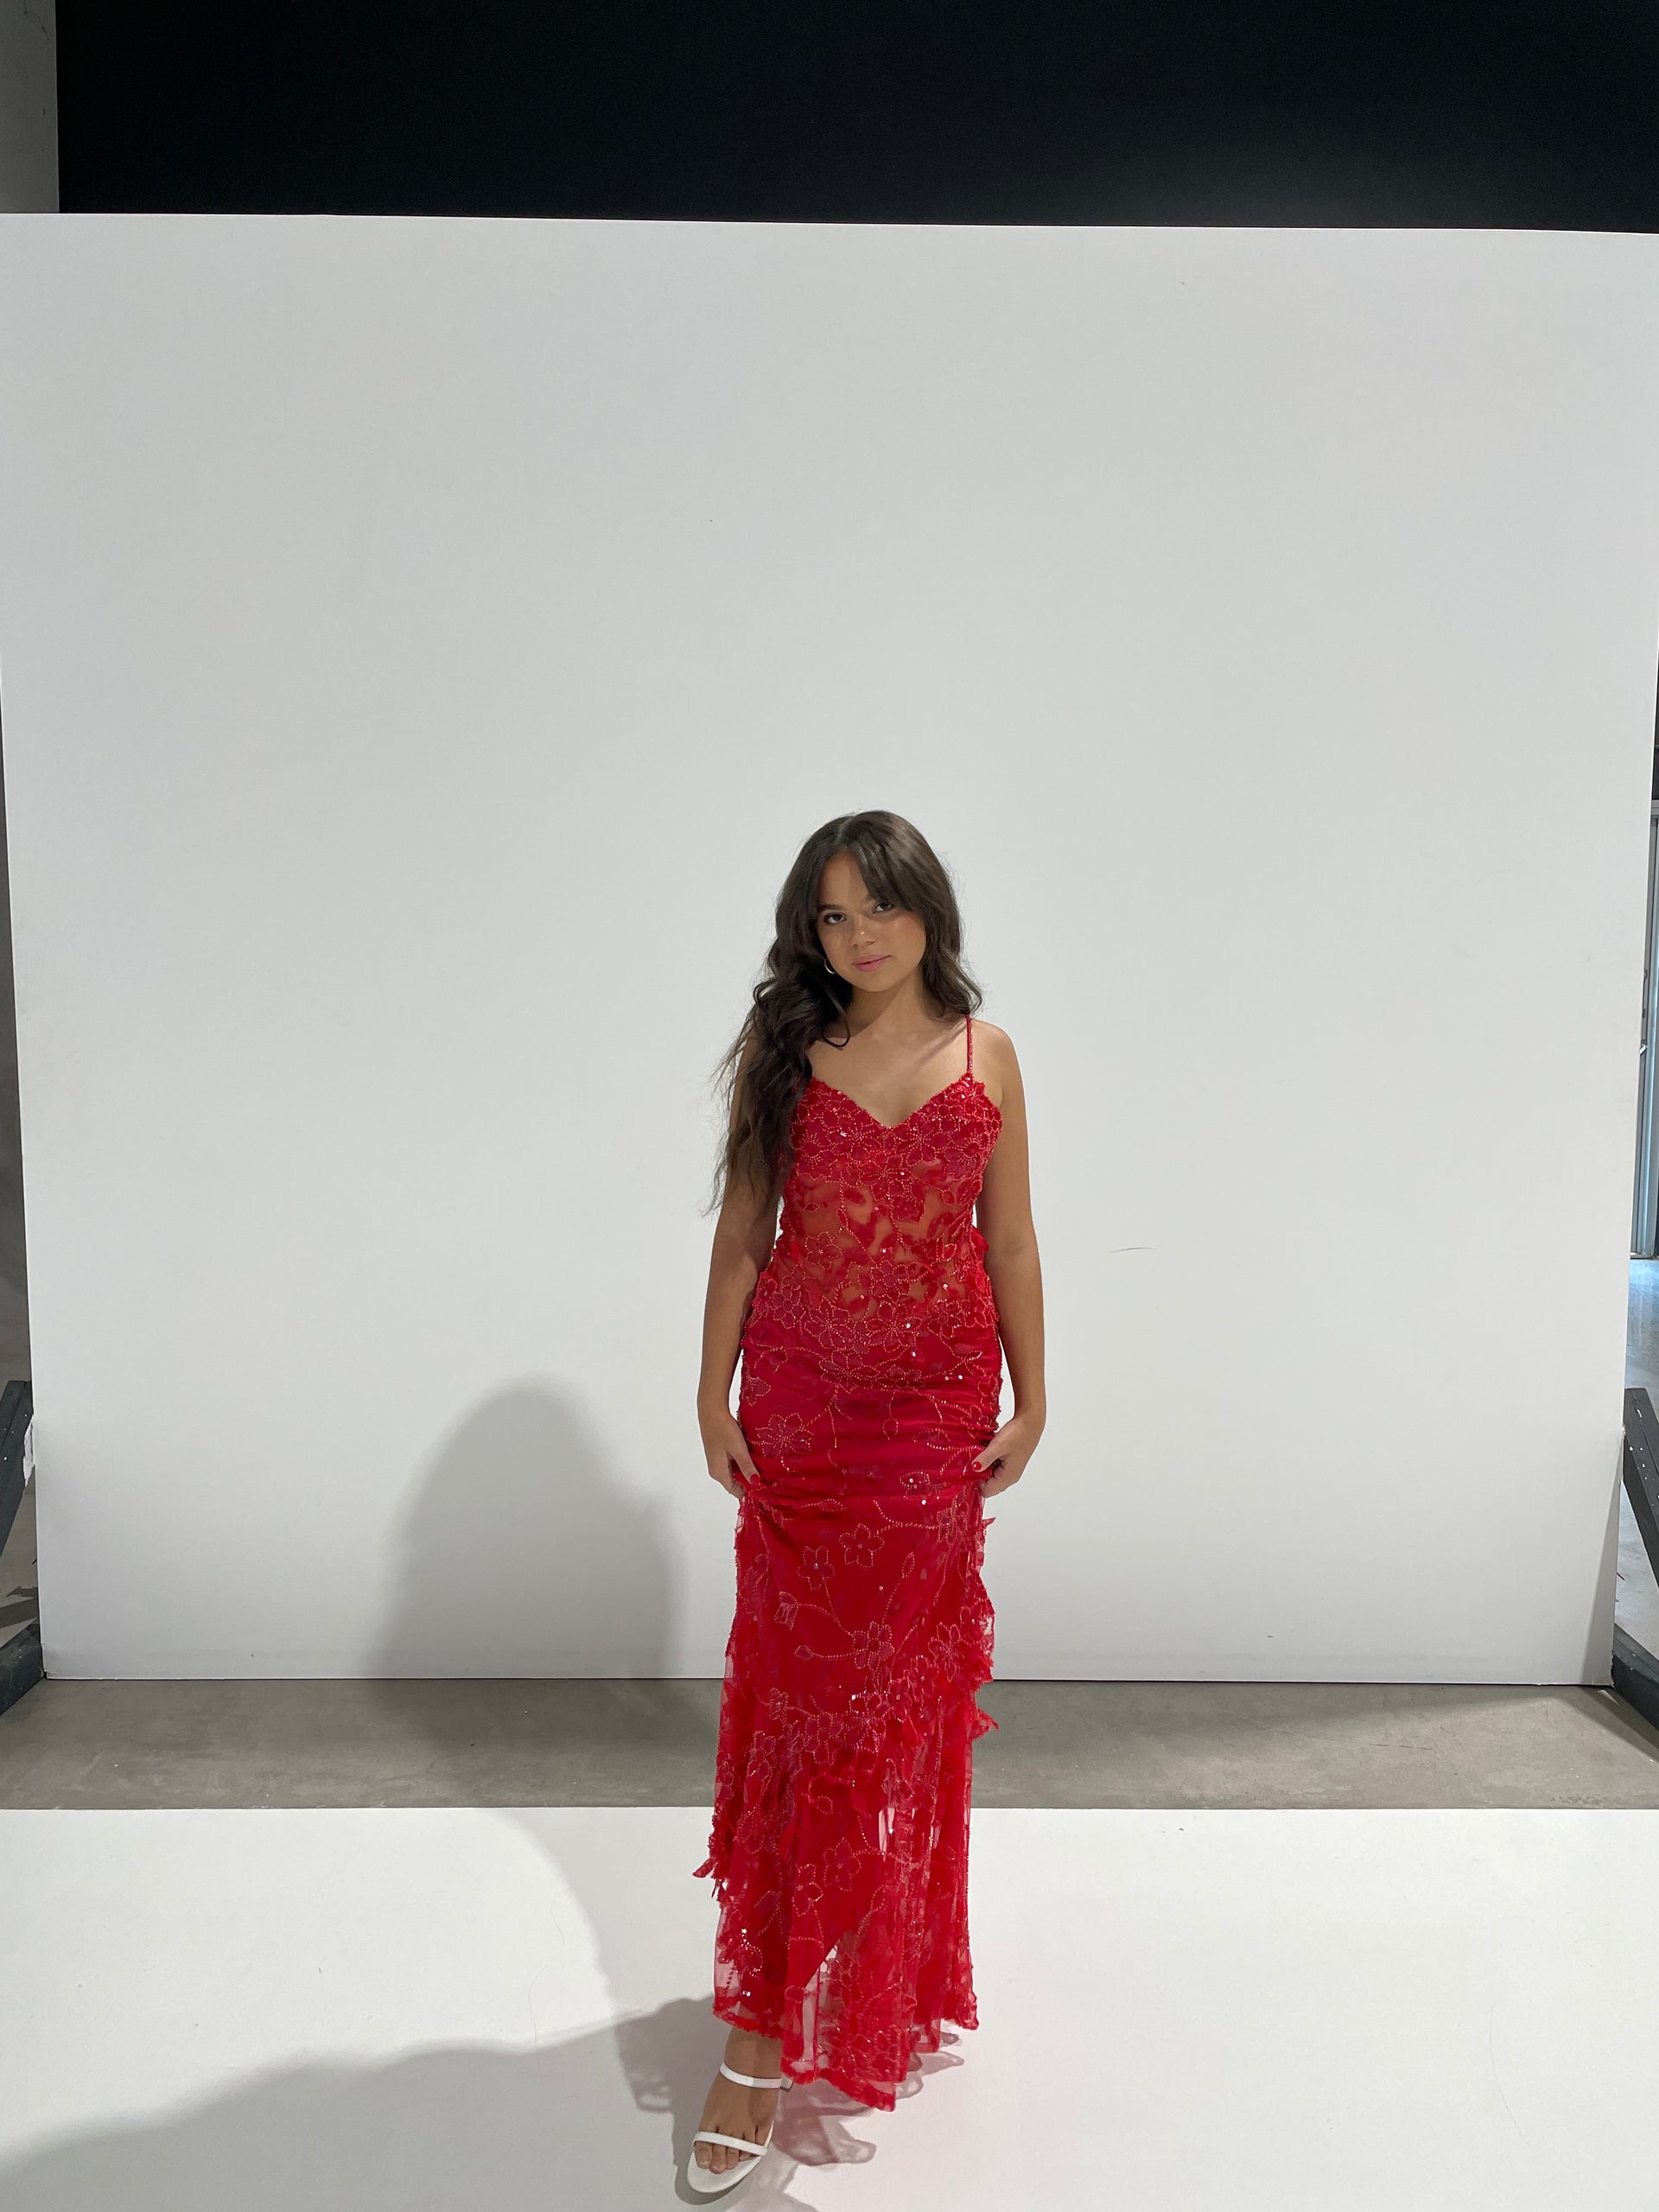 Cha Collective - Delilah Maxi in Red (no train)